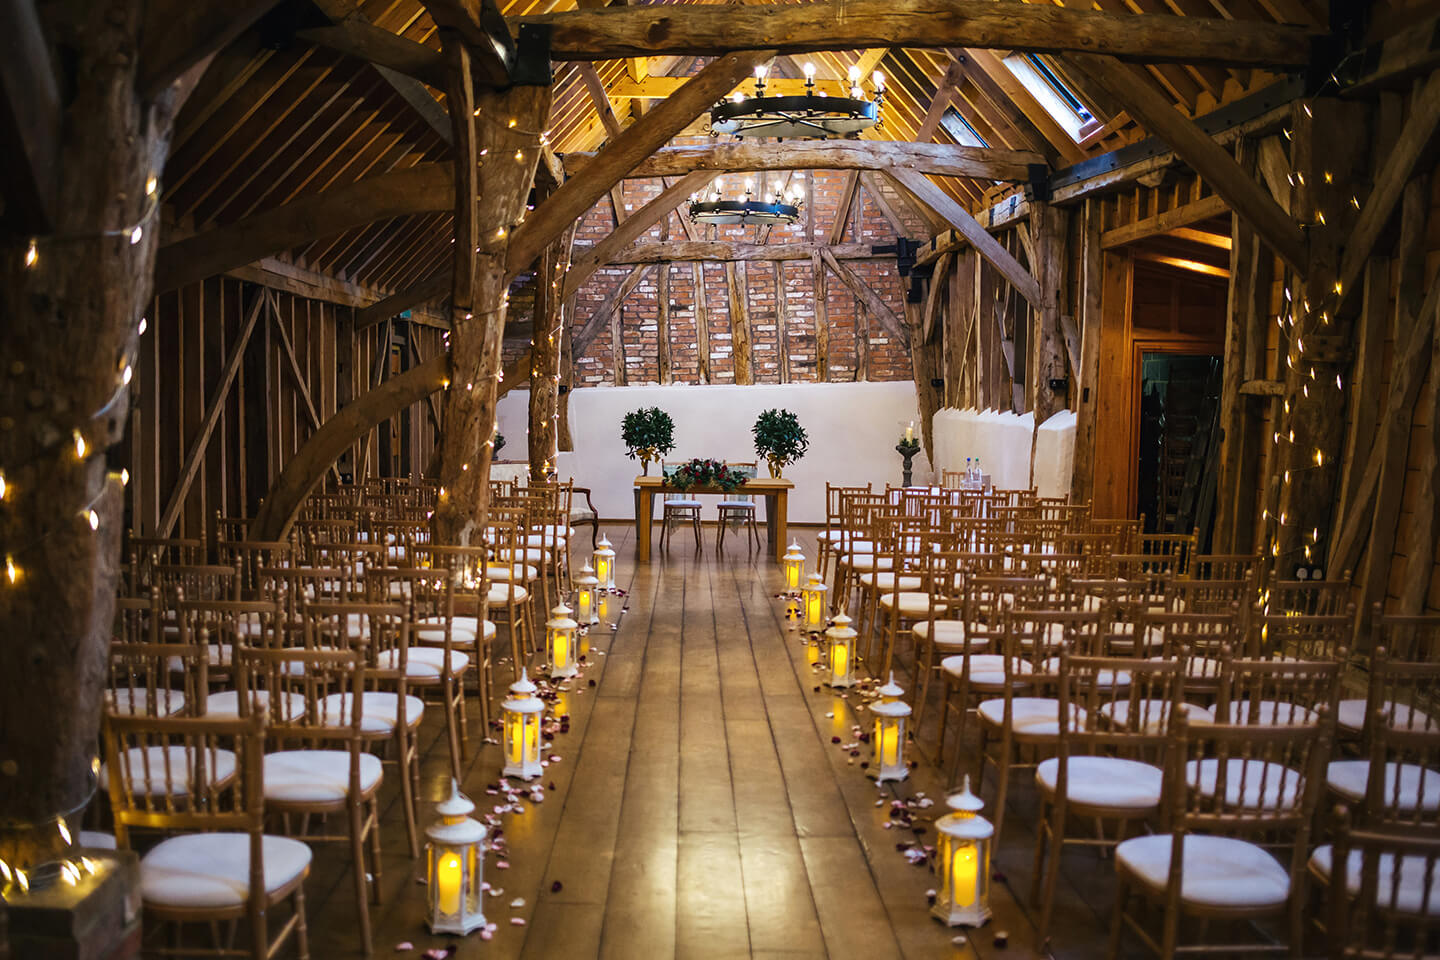 The Rickety Barn at Bassmead Manor Barns is dressed for a beautiful winter wedding